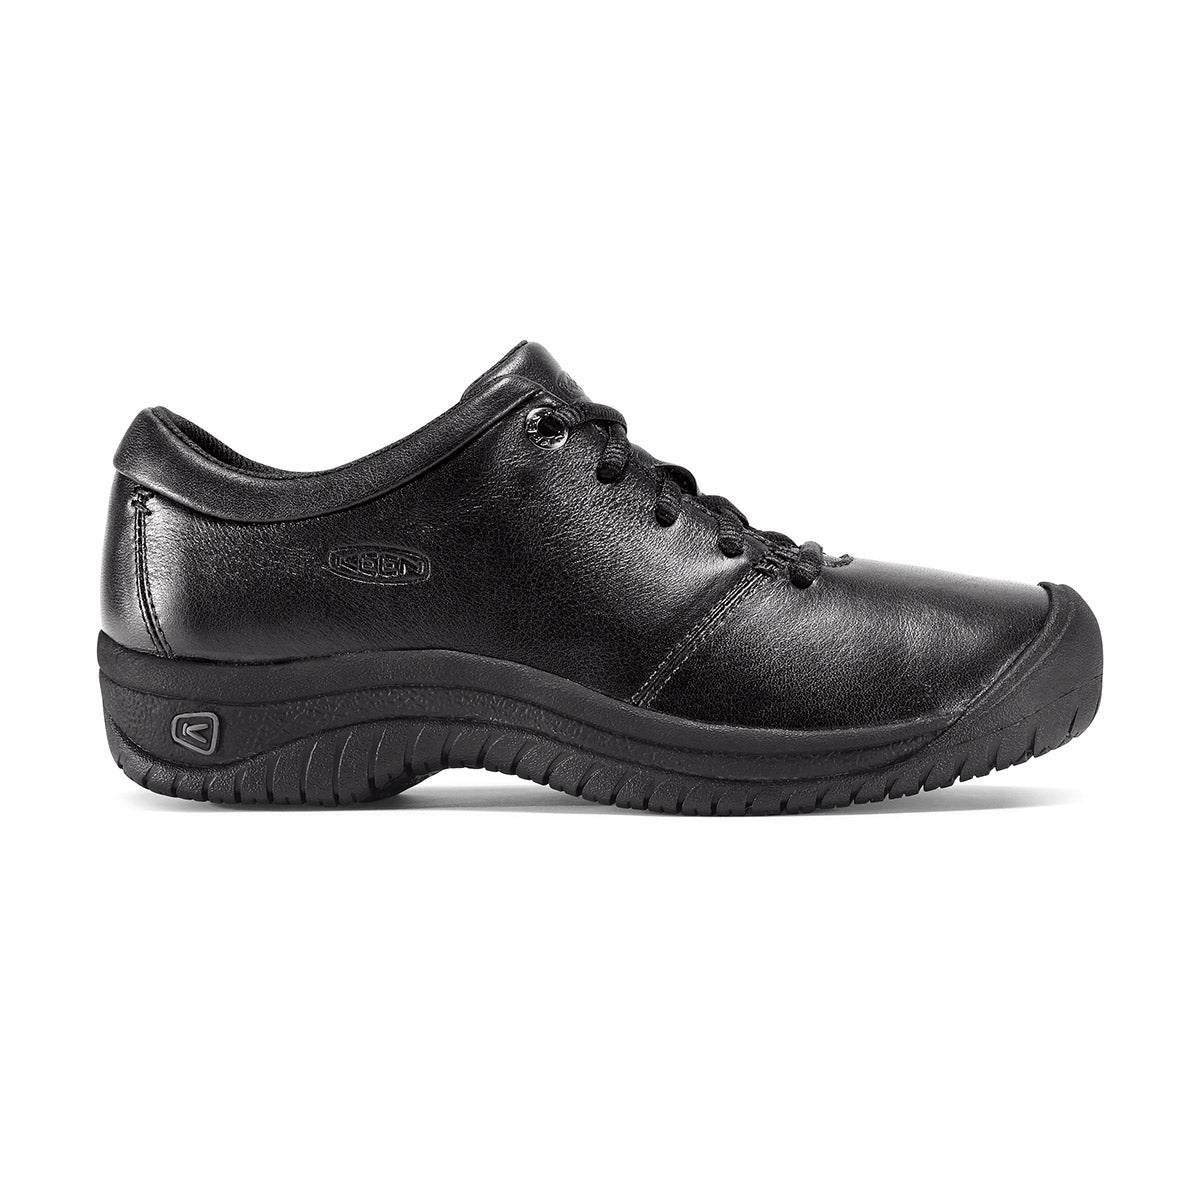 A single Keen PTC Oxford Black work shoe with non-slip sole against a white background.